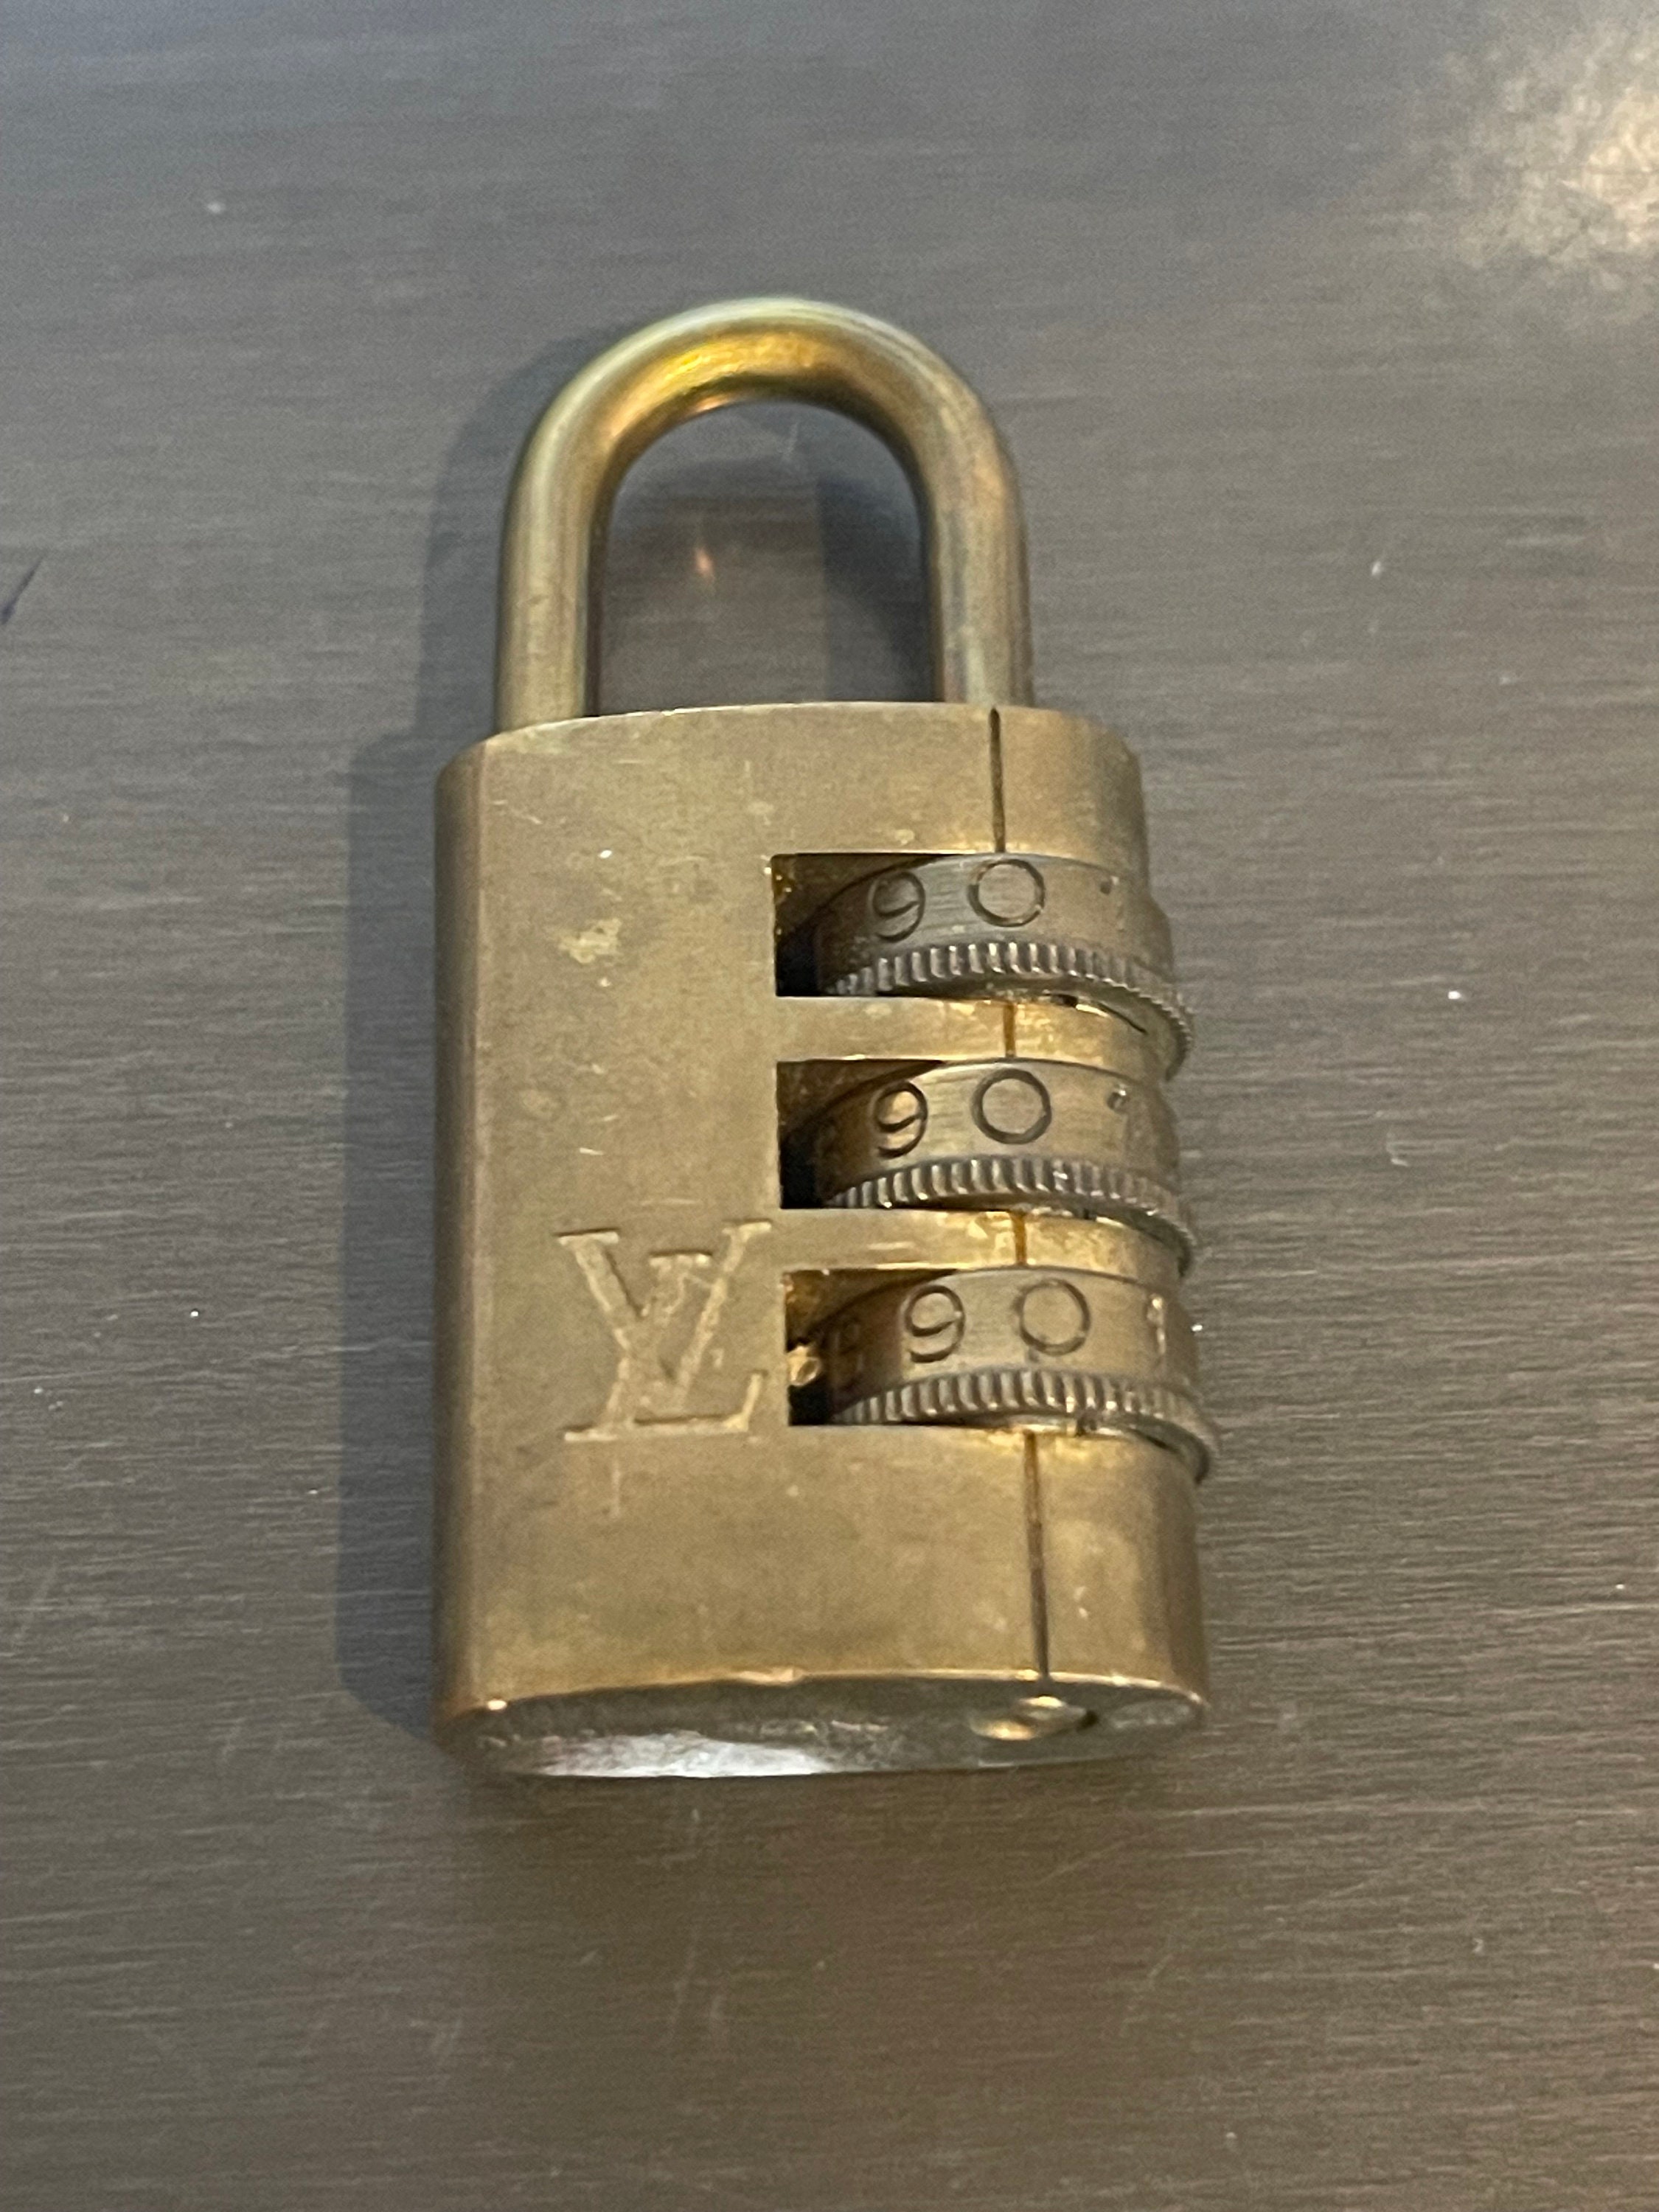 Pinkerly Special Louis Vuitton Padlock and One Key 318 Lock 